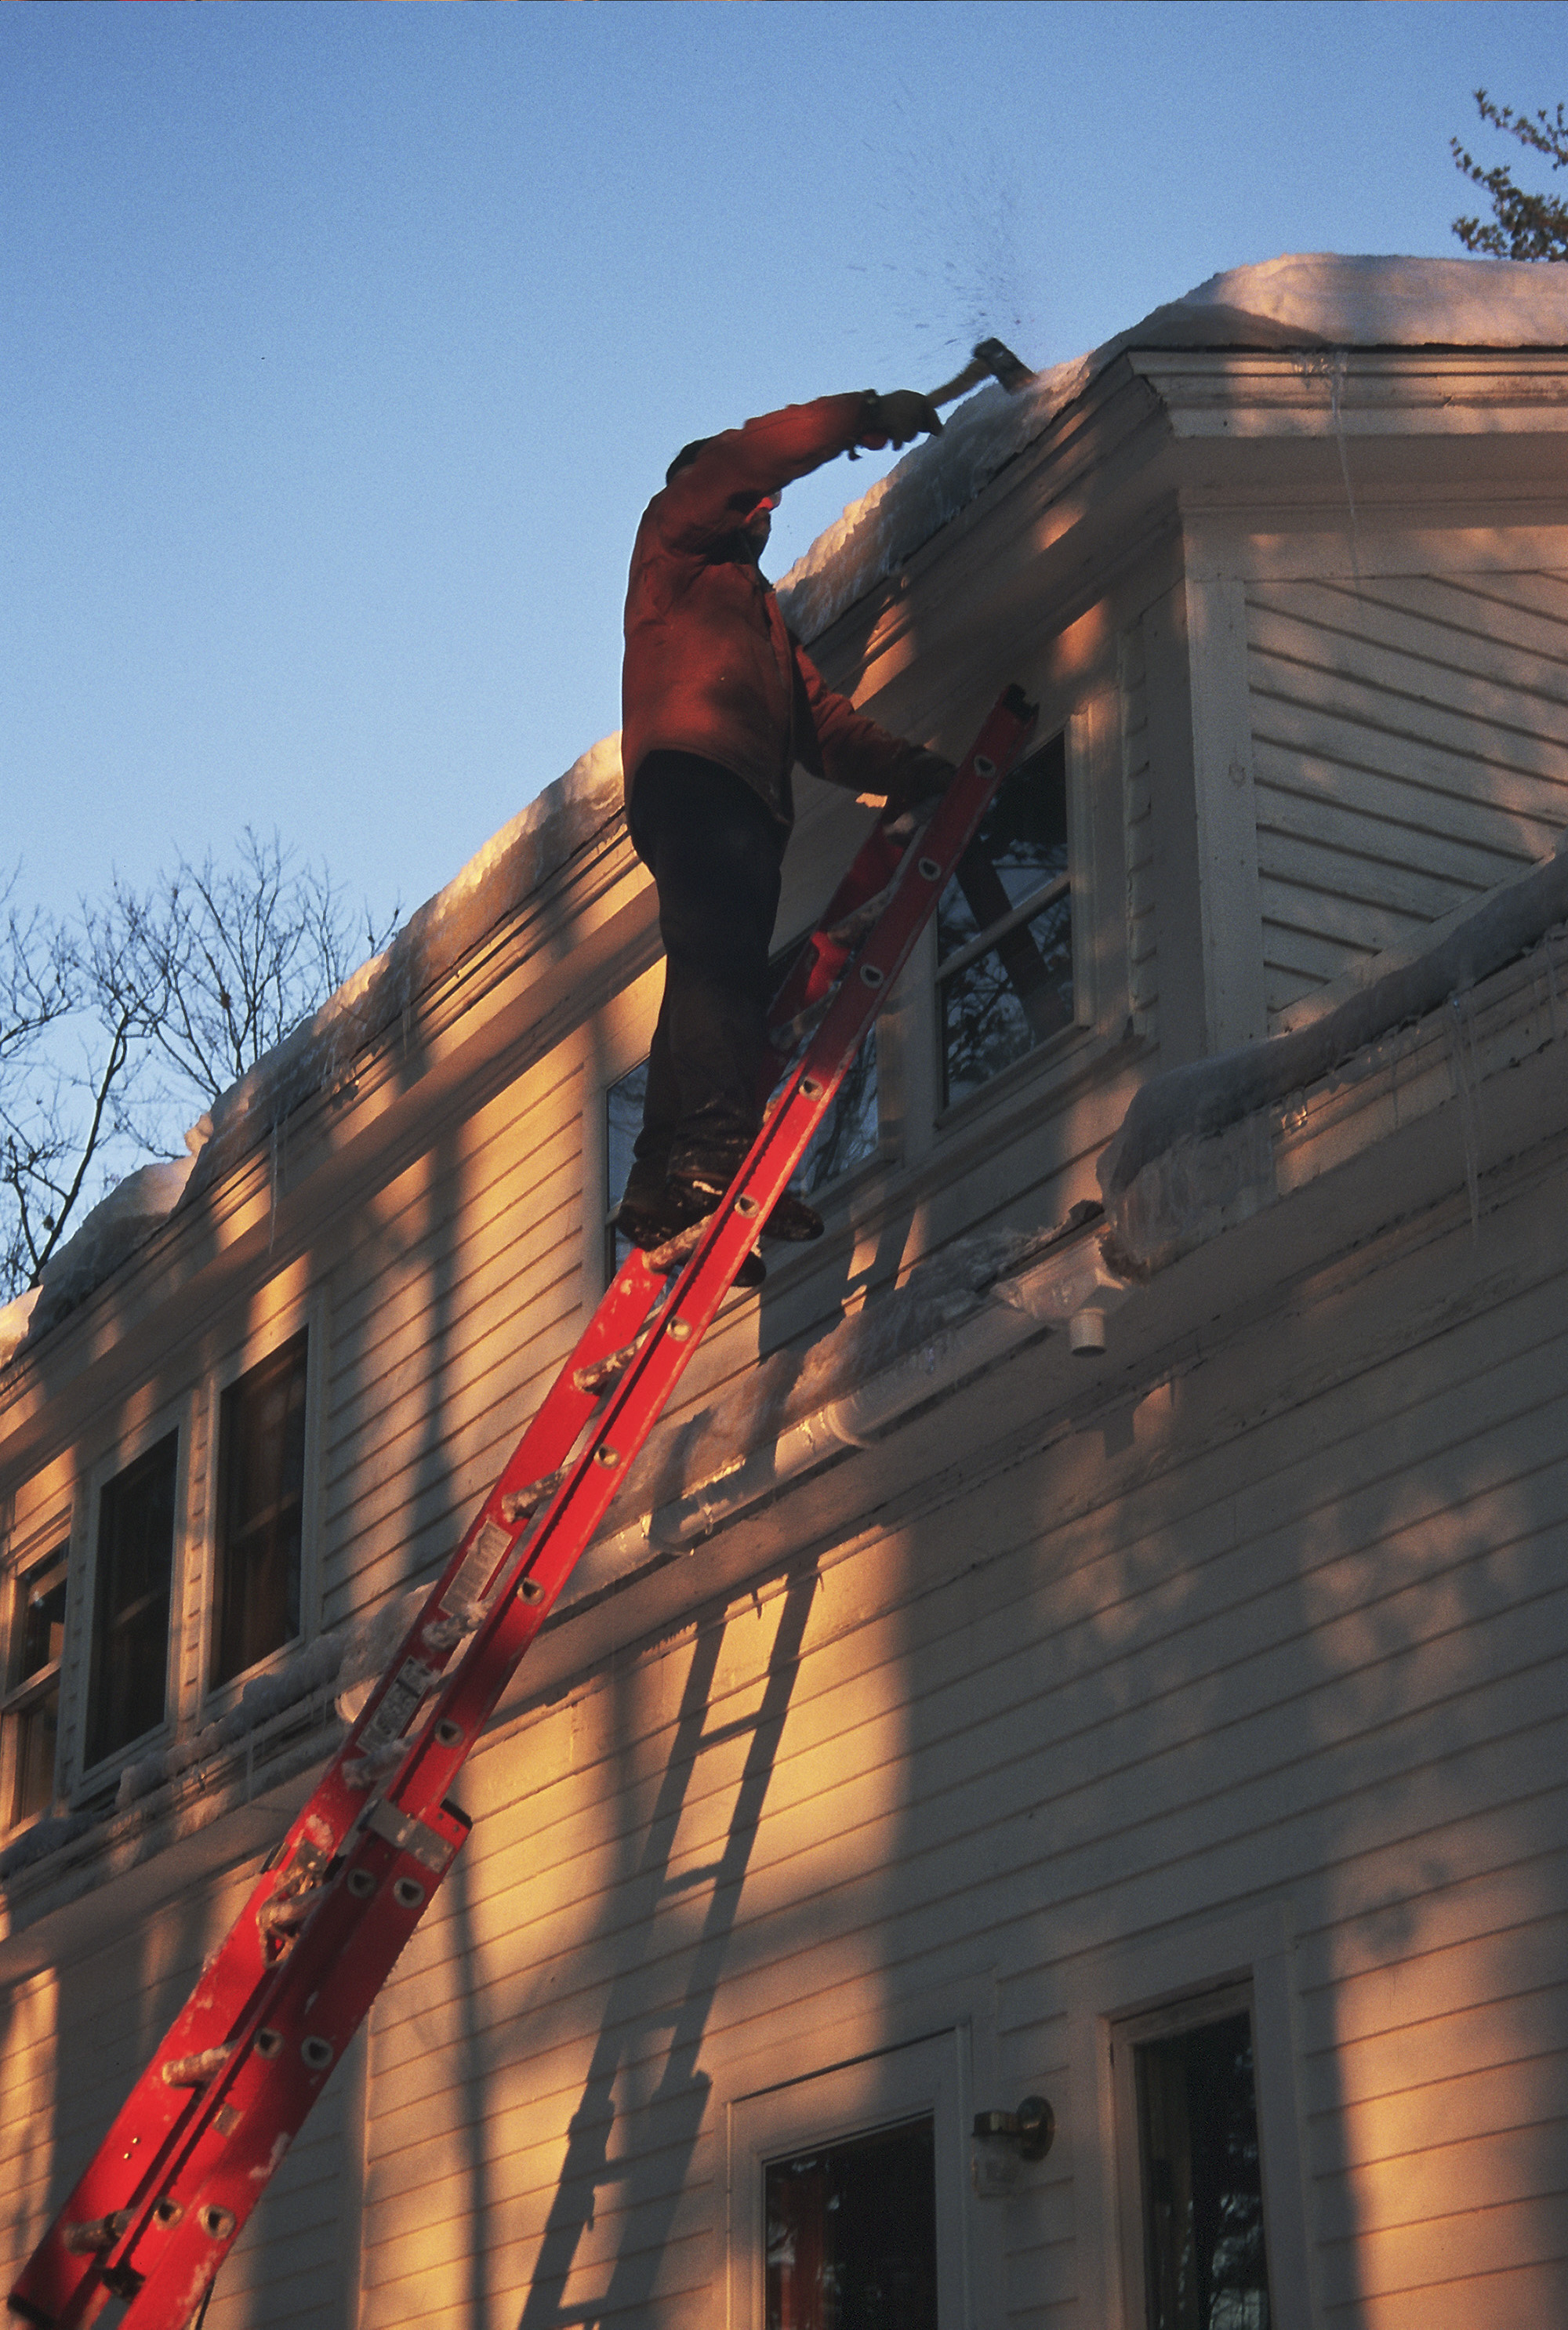 Someone on a ladder chopping ice off a roof.